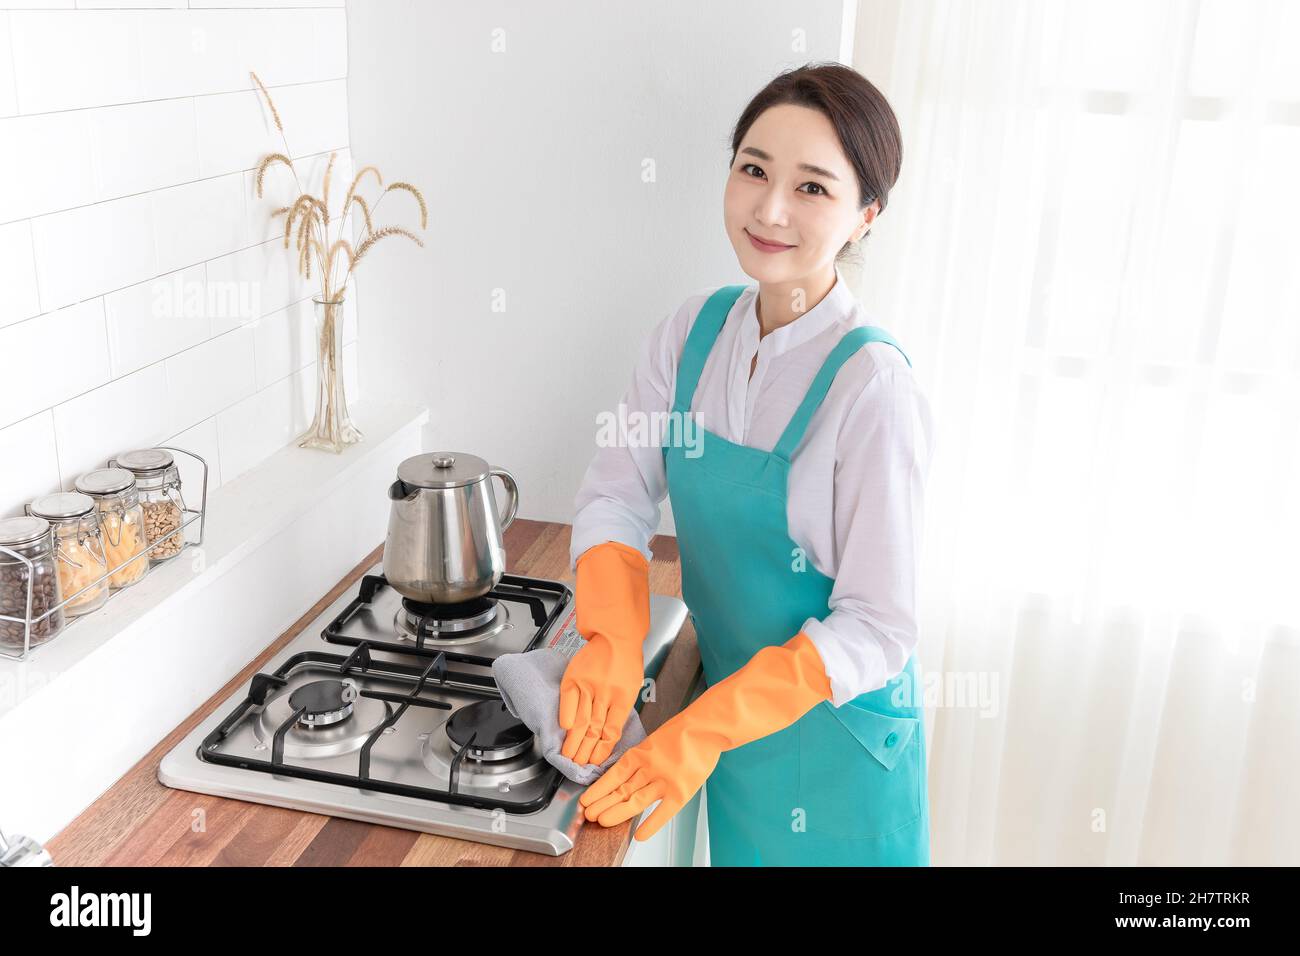 Asian woman wearing white shirt and apron, professional home cleaning service job Stock Photo